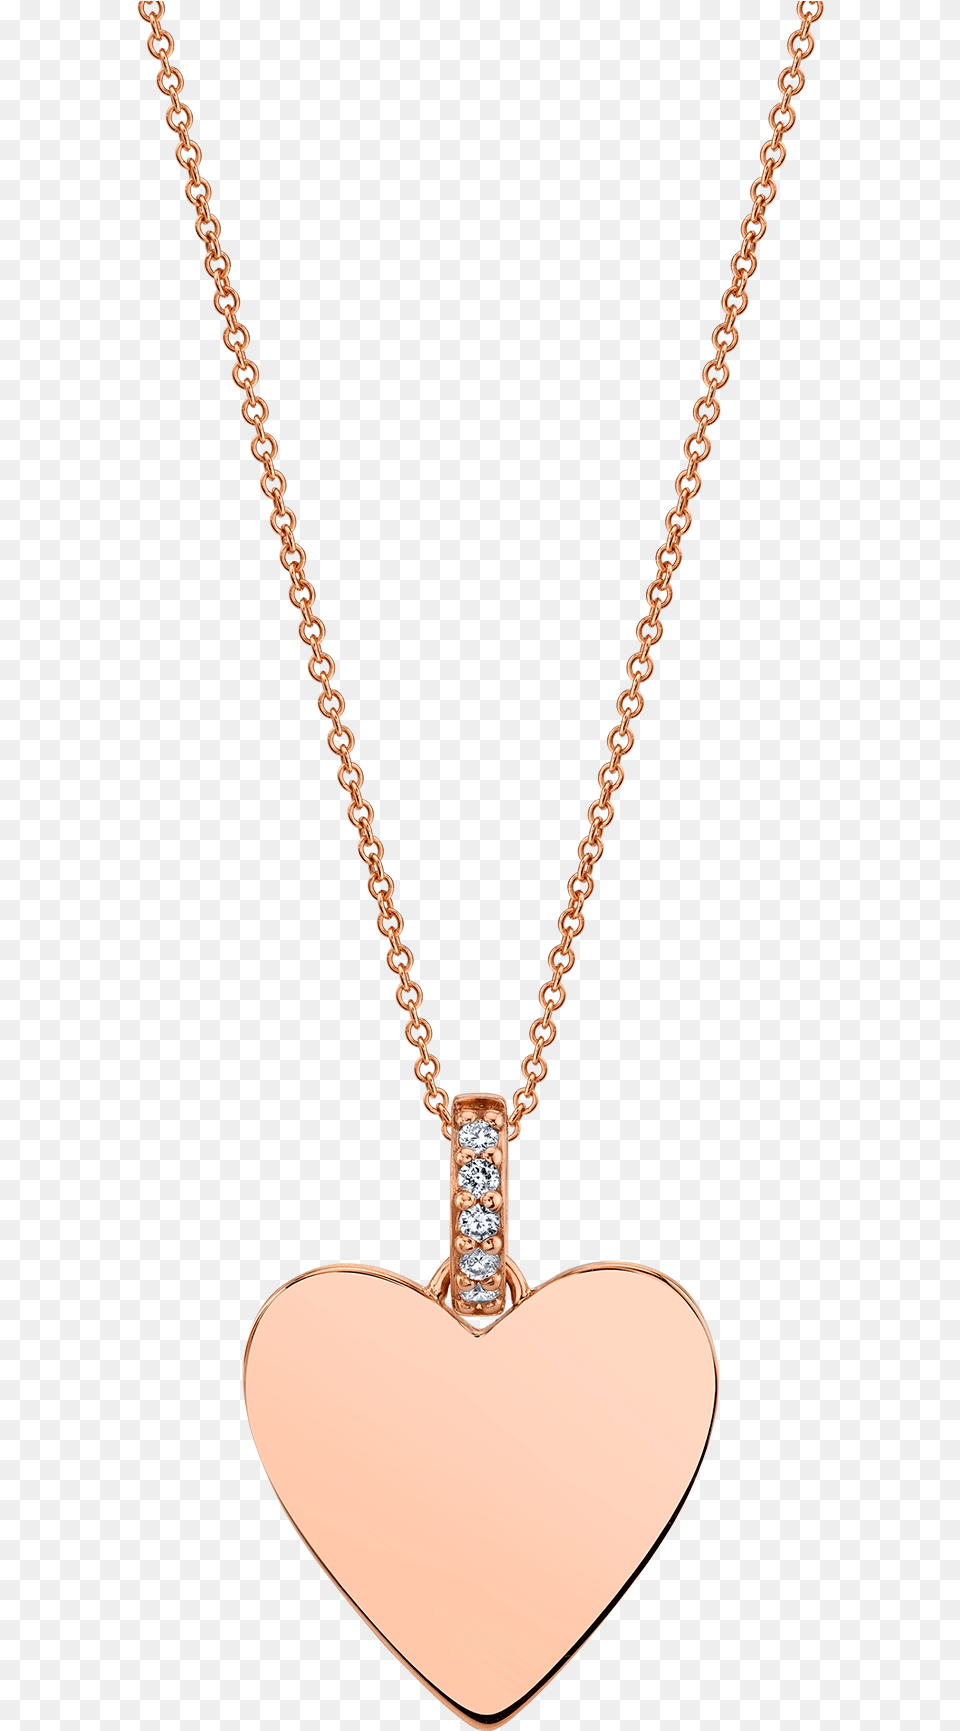 Heart Pendant With Diamond Bale Locket, Accessories, Jewelry, Necklace, Gemstone Free Png Download